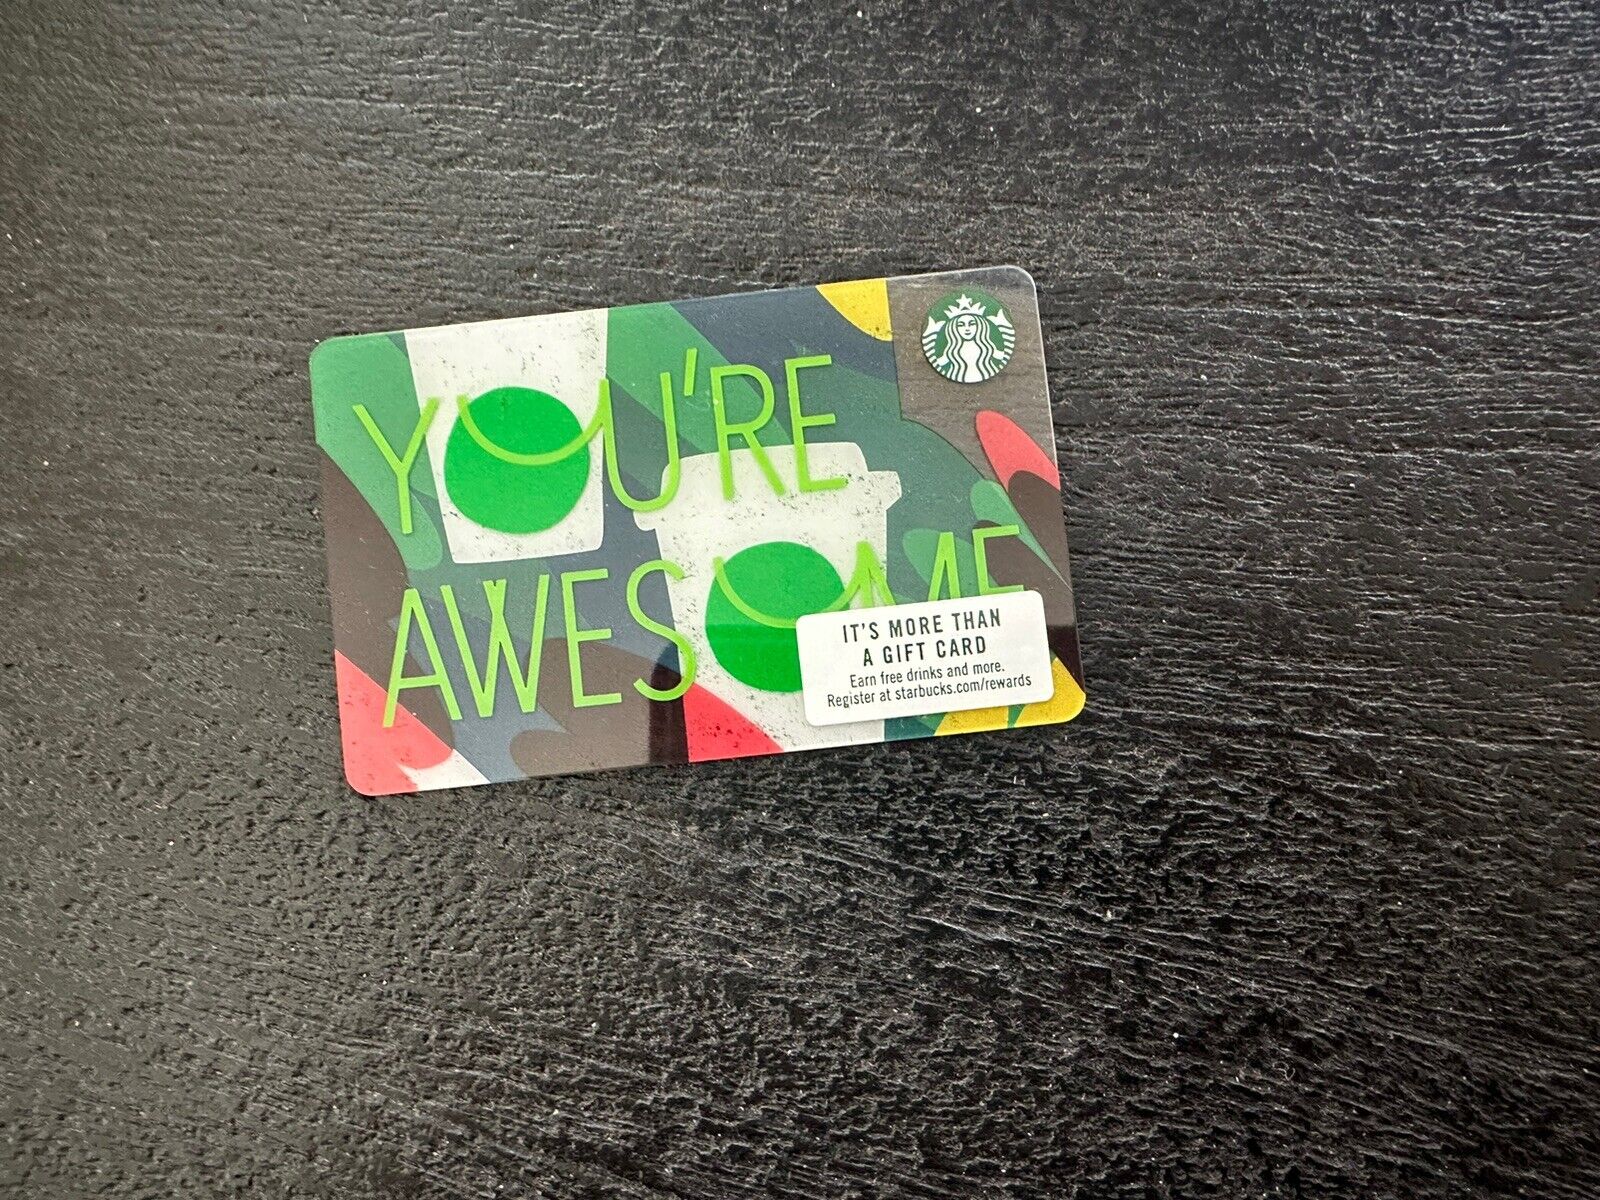 Starbucks 2017 You’re Awesome Coffee Gift Card